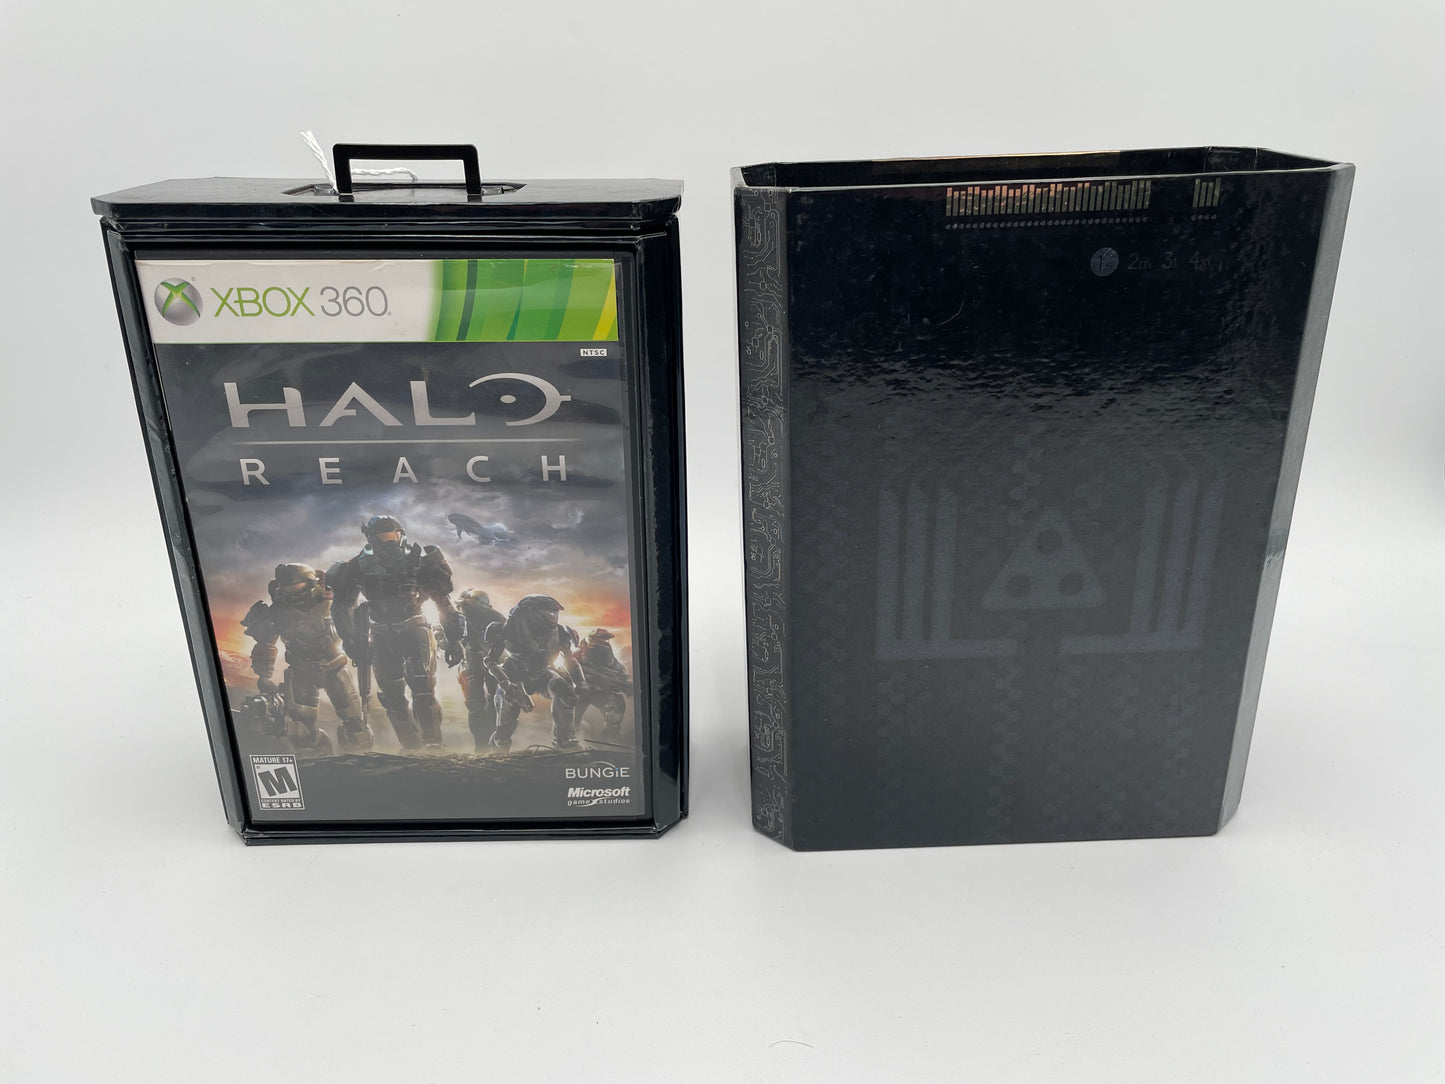 Halo Reach - XBox 360 - Limited Edition Boxed Set  #103770